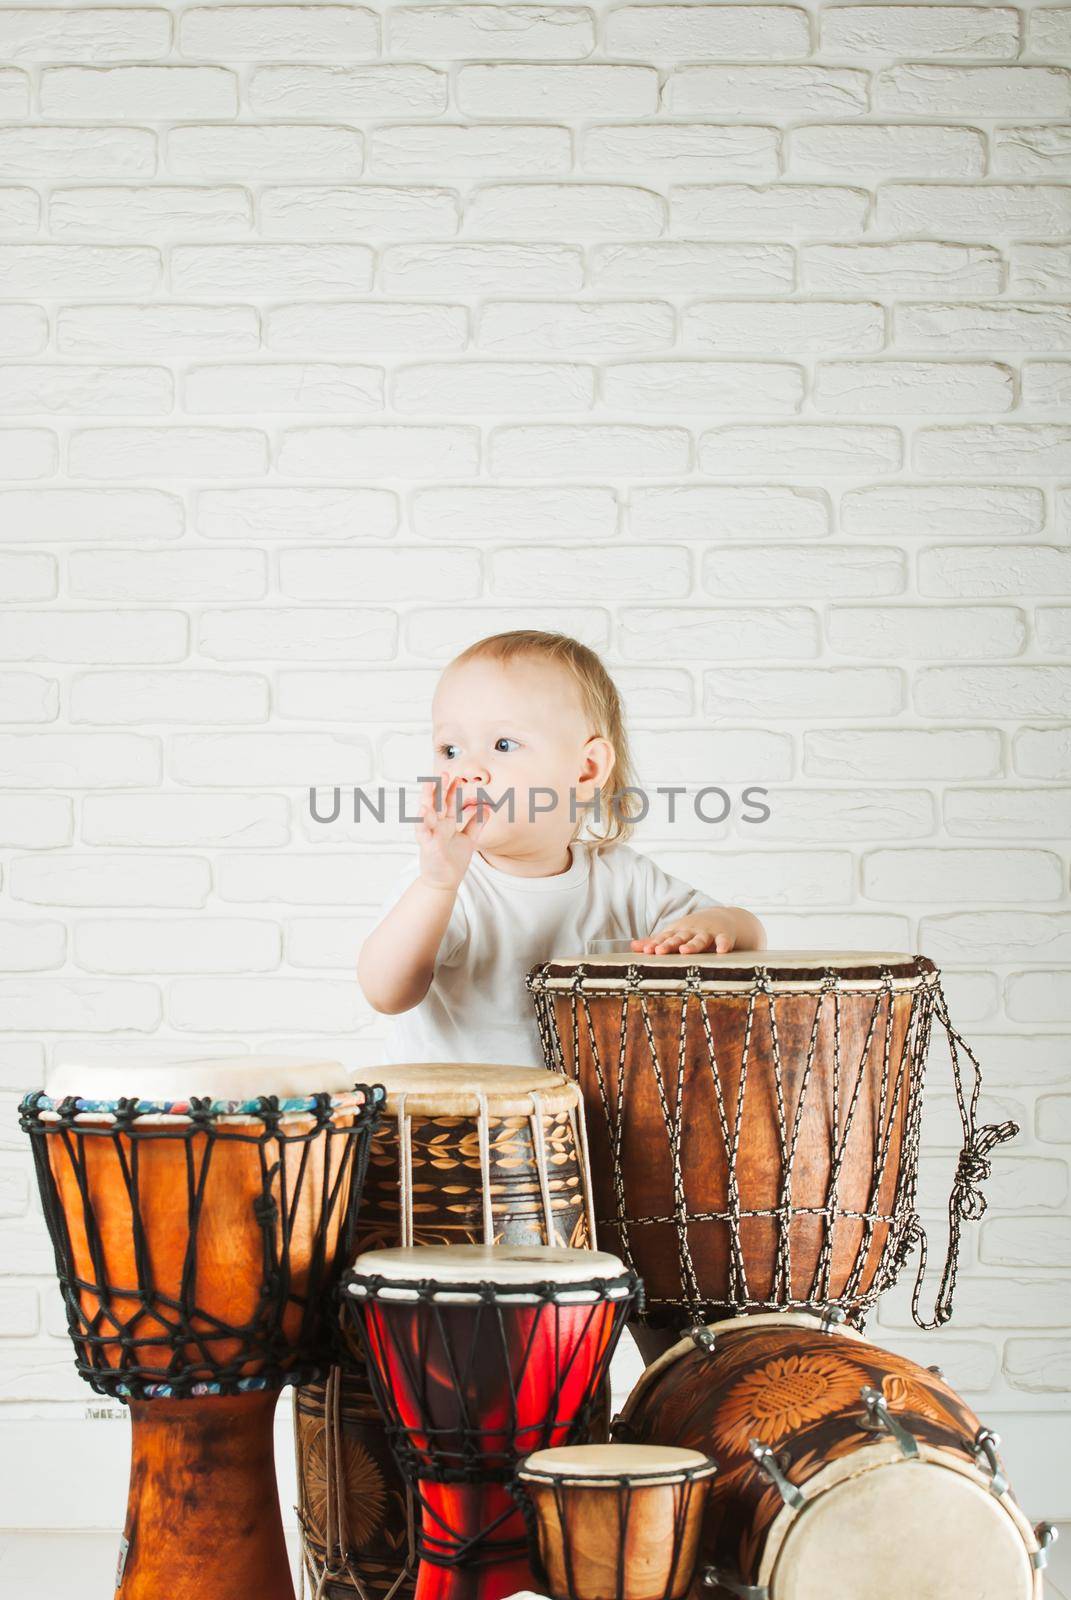 Cute baby playing drums by maramorosz